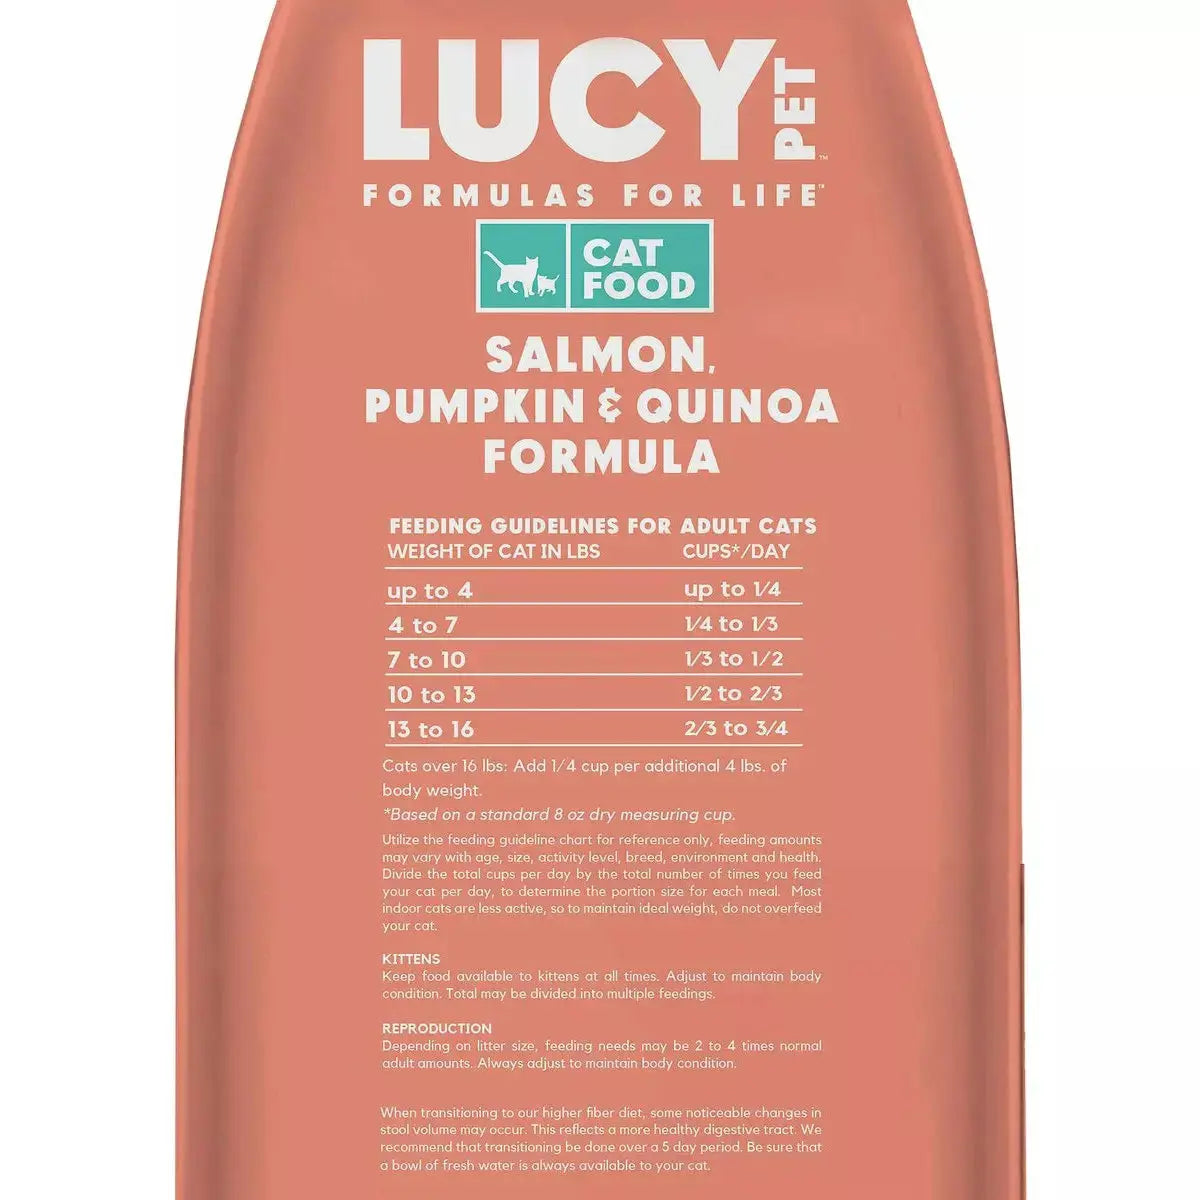 Lucy Pet Products Formulas for Life Dry Cat Food Salmon, Pumpkin & Quinoa Lucy Pet Products